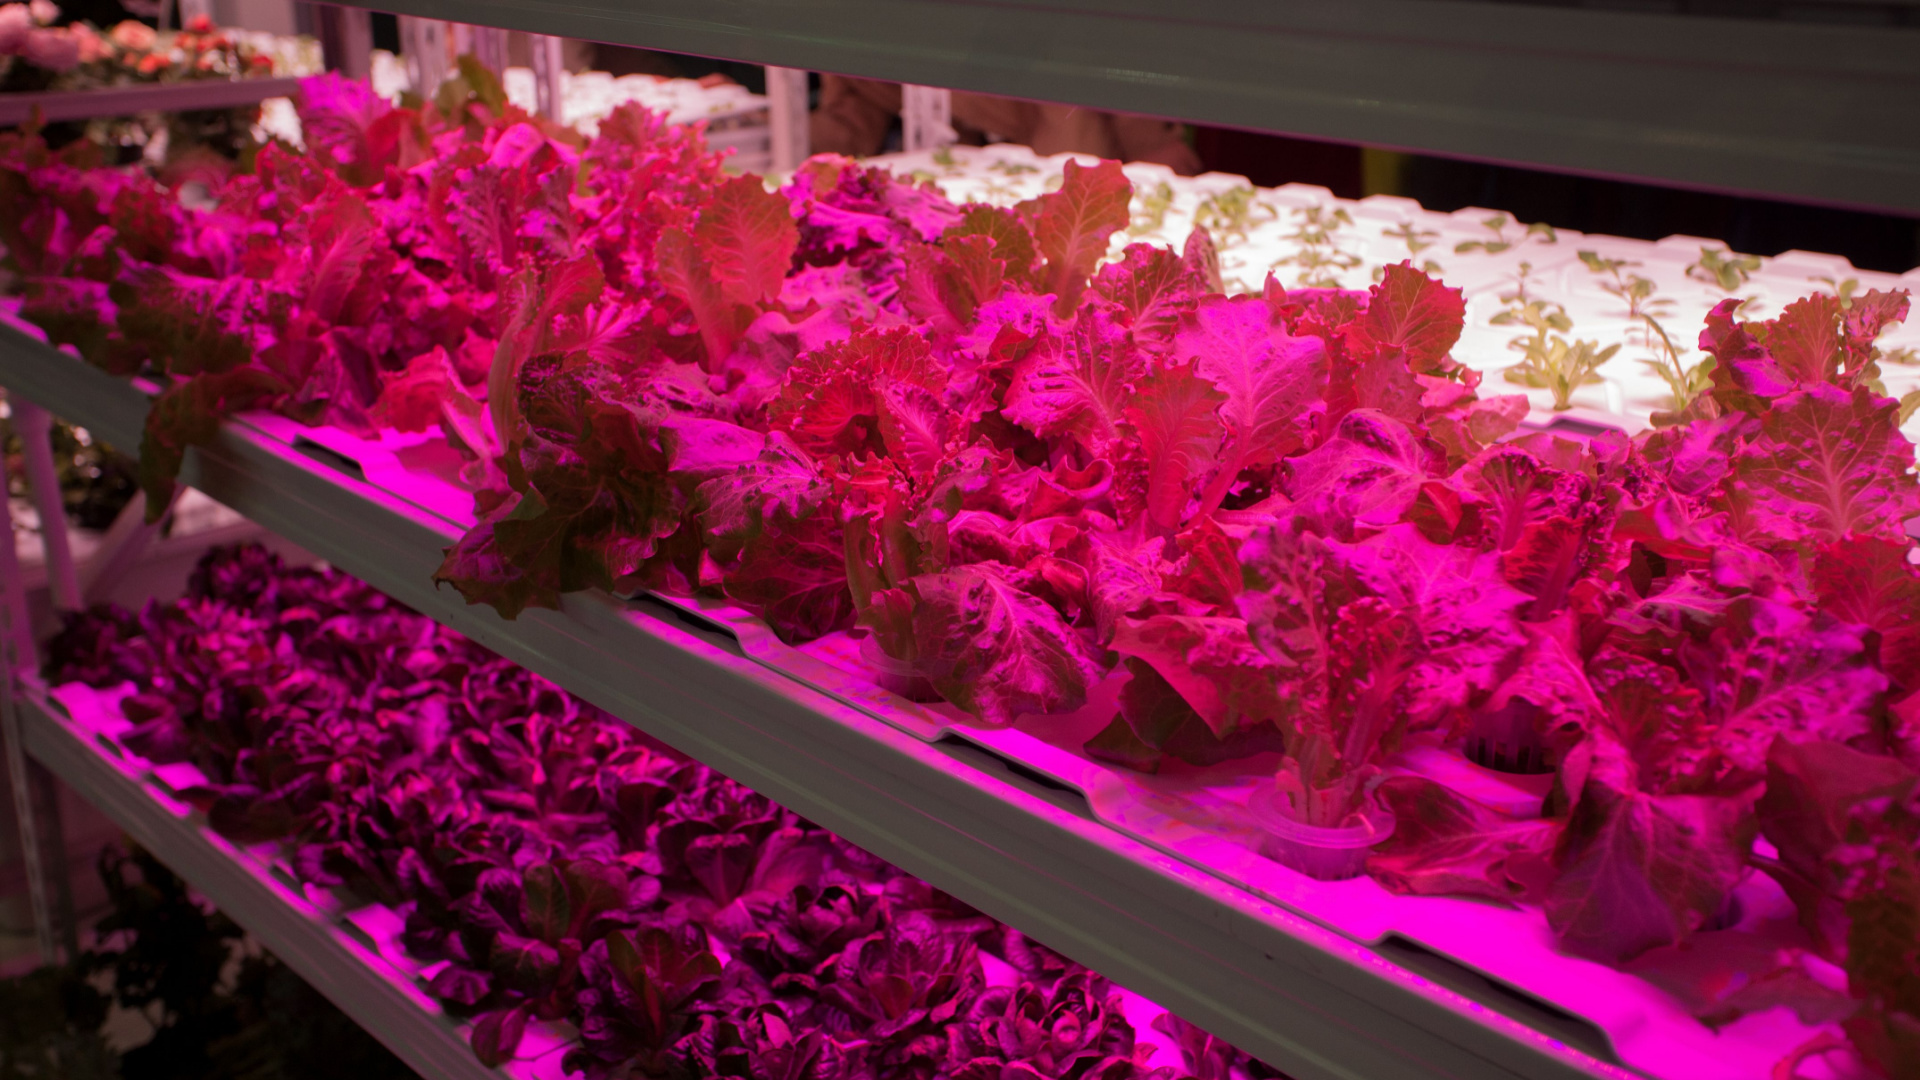 Indoor farming, among challenges and new technologies